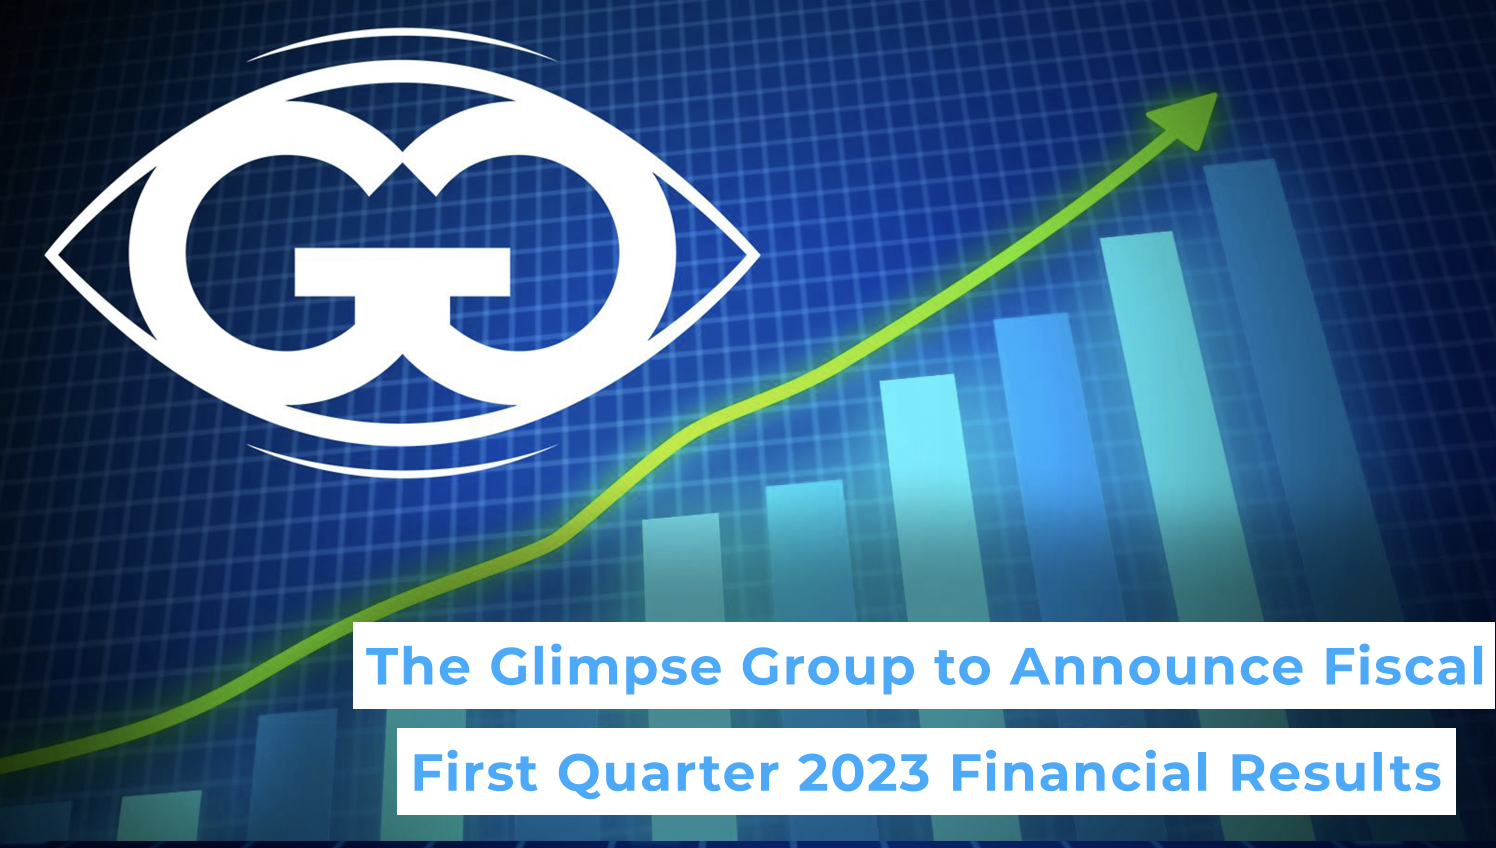 The Glimpse Group to Announce Fiscal First Quarter 2023 Financial Results Monday, November 14, 2022 at 4:30 p.m. Eastern Time